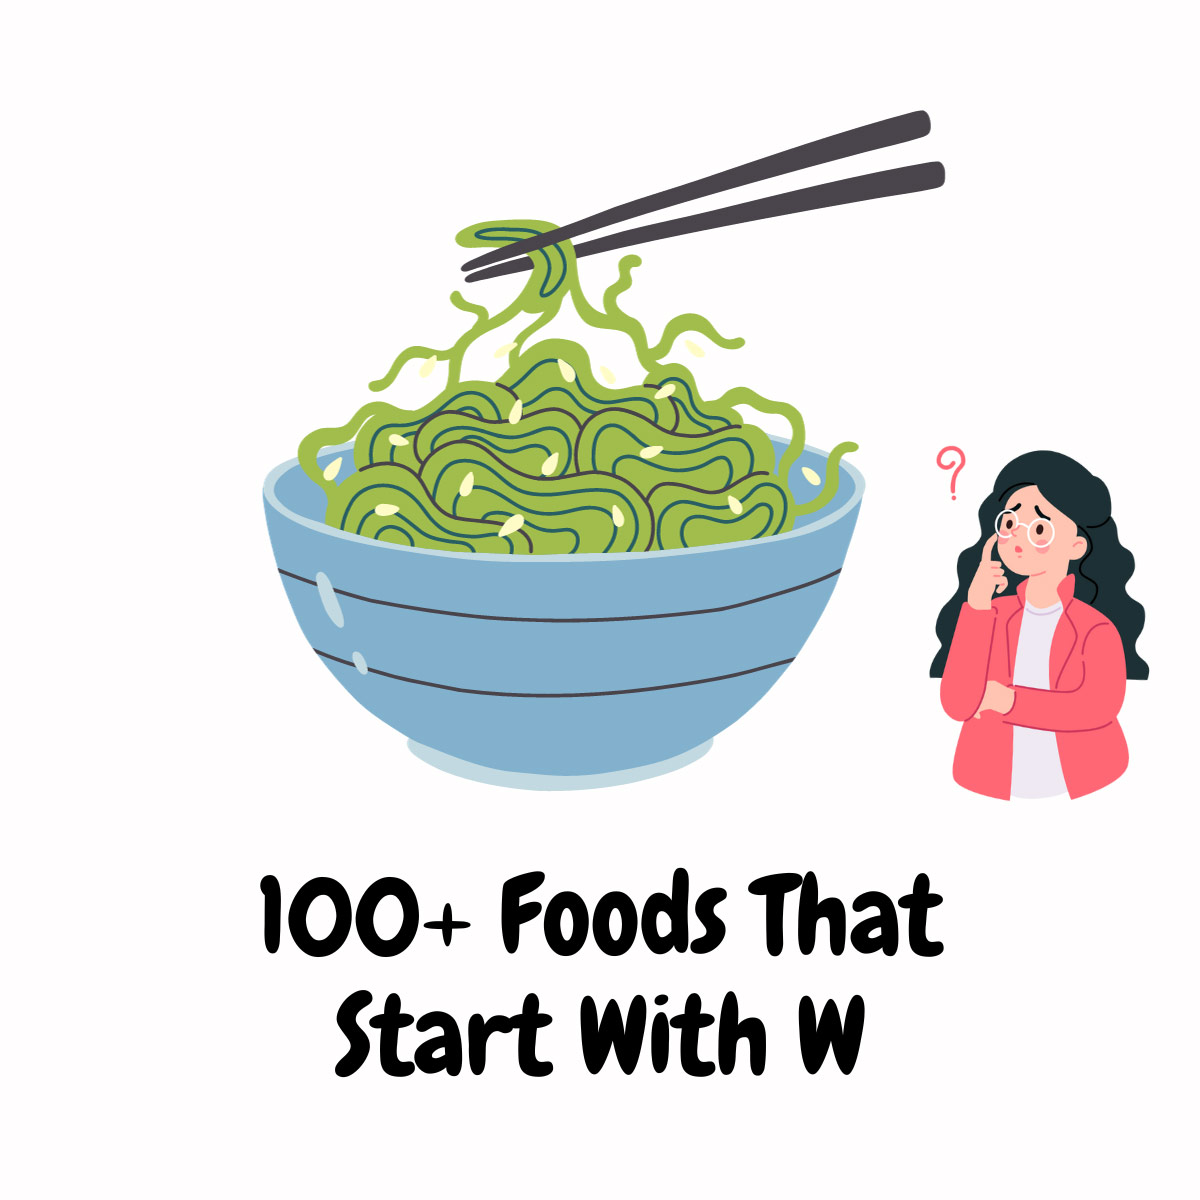 Foods That Start With W featured image | Girl Meets Food